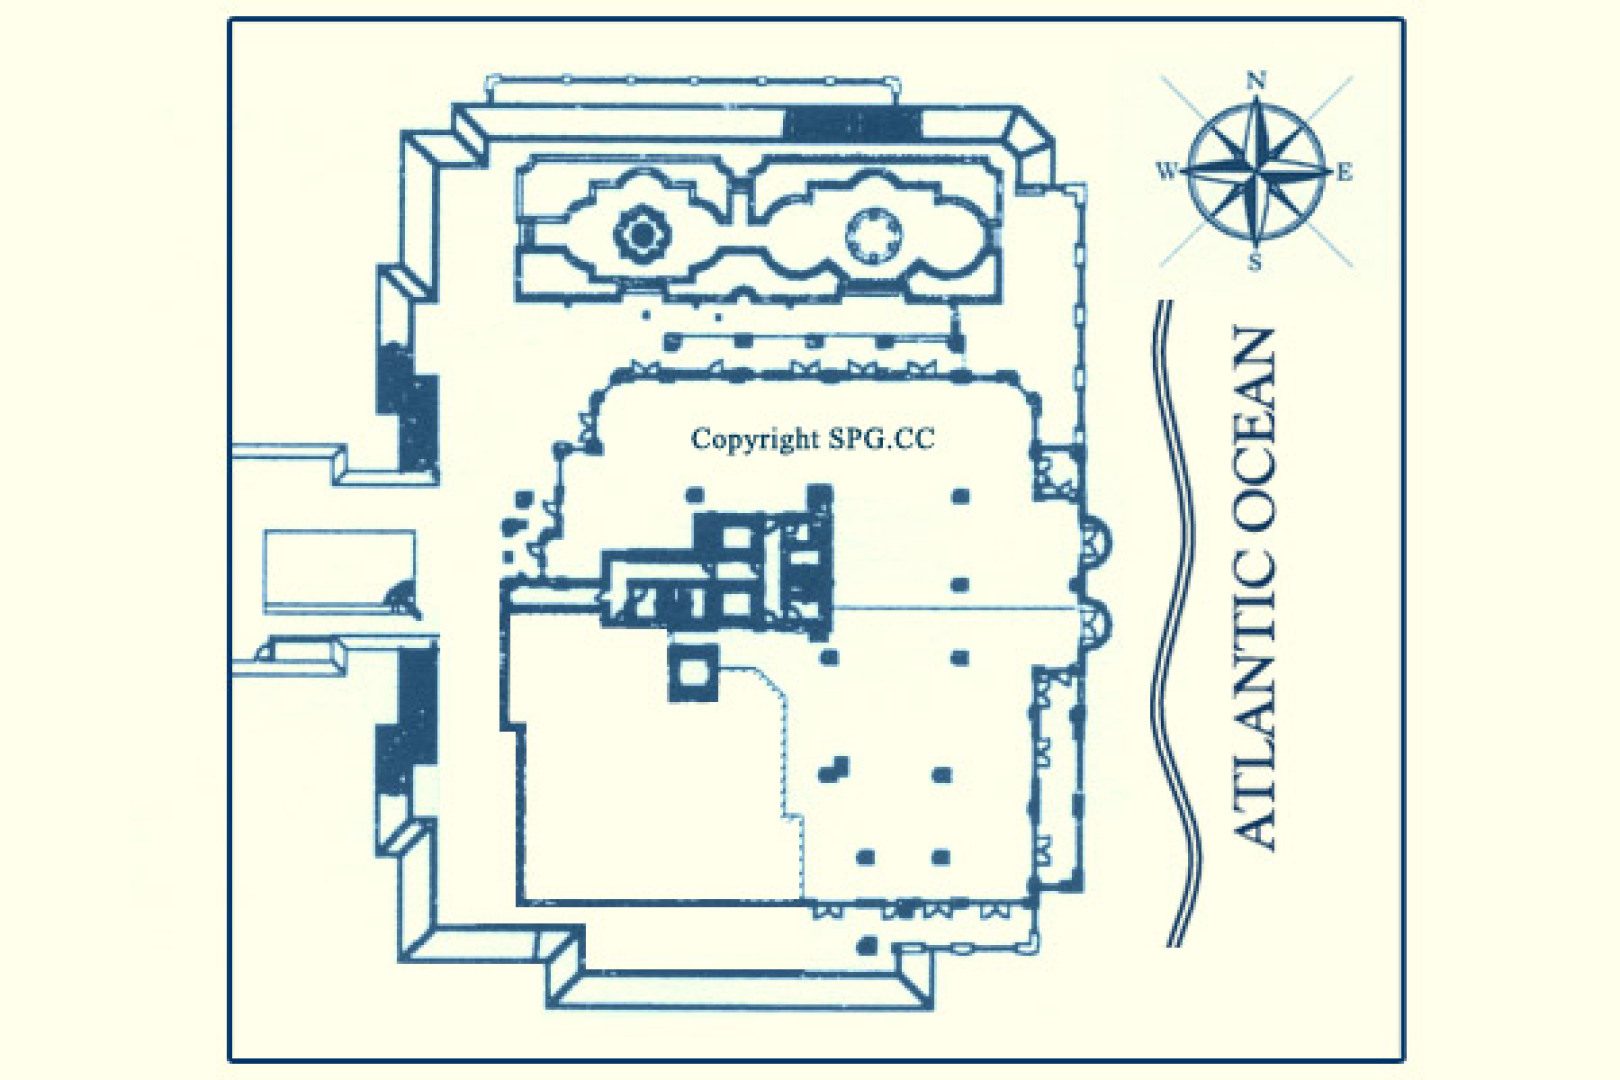 Siteplan for The Excelsior, Luxury Oceanfront Condominiums Located at 400 South Ocean Boulevard, Boca Raton, Florida 33432